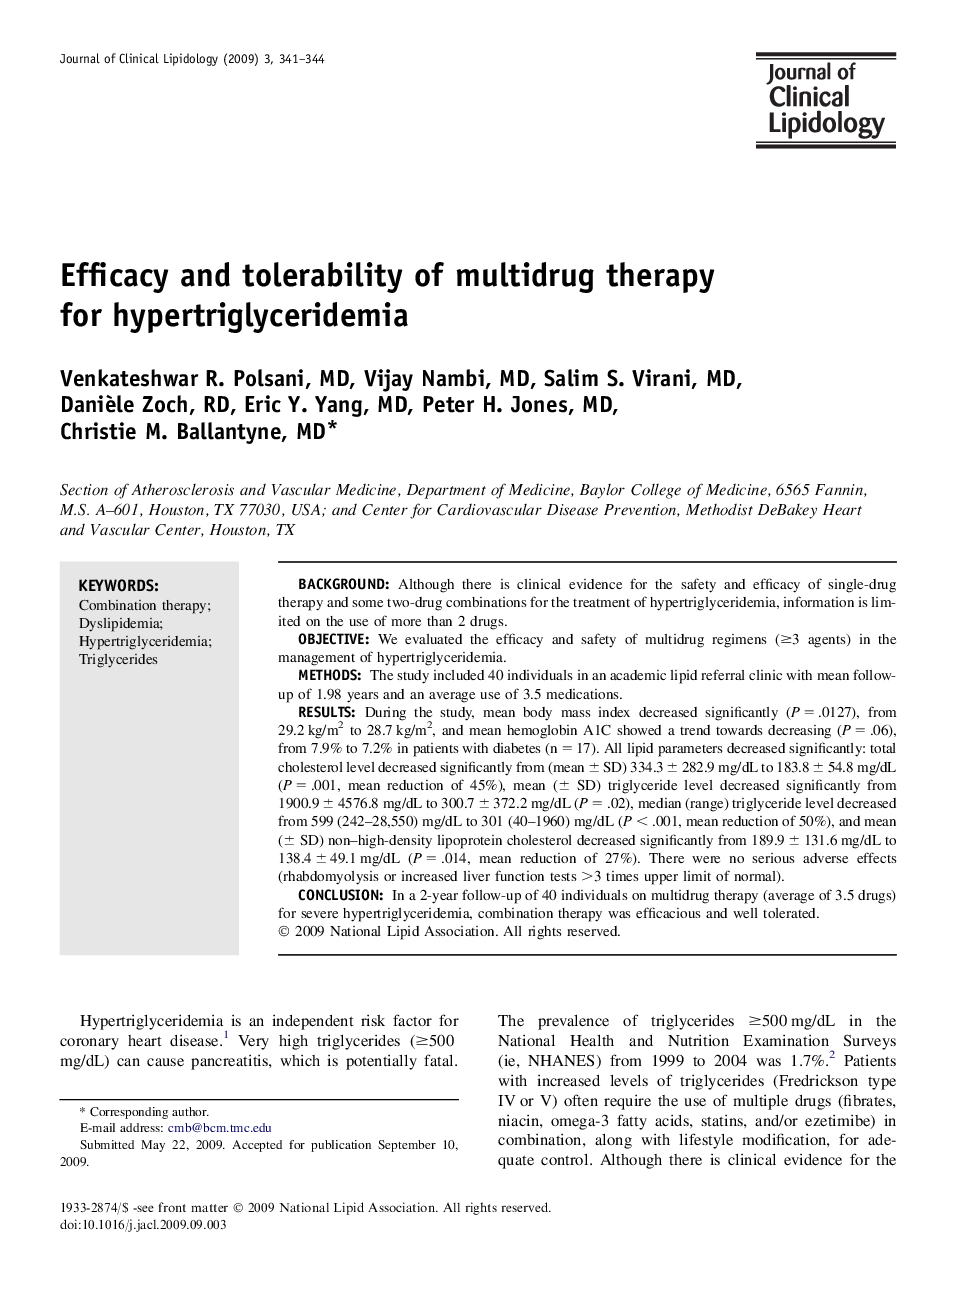 Efficacy and tolerability of multidrug therapy for hypertriglyceridemia